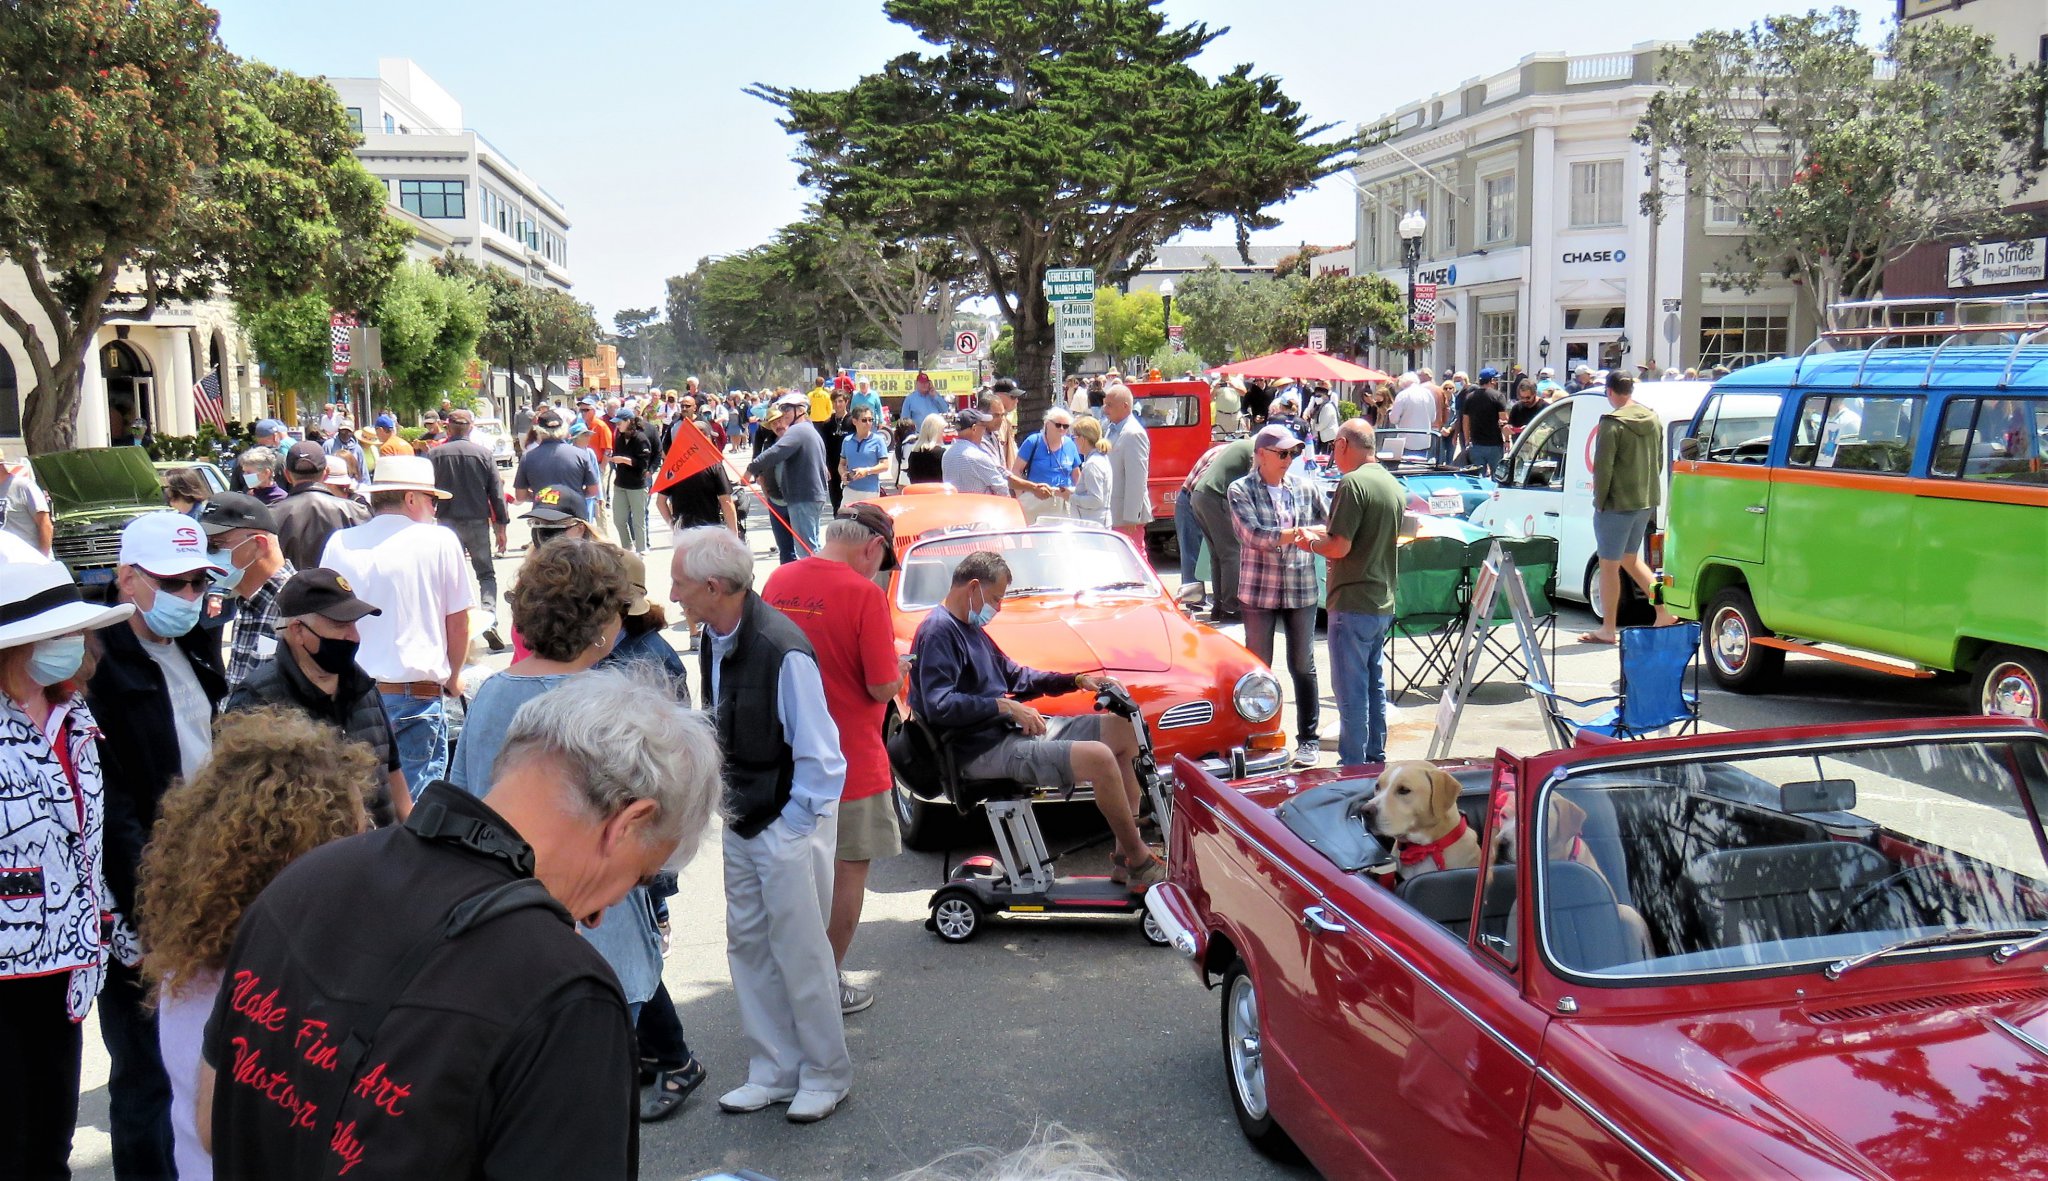 Little Car Show brings great things in small packages to Pacific Grove